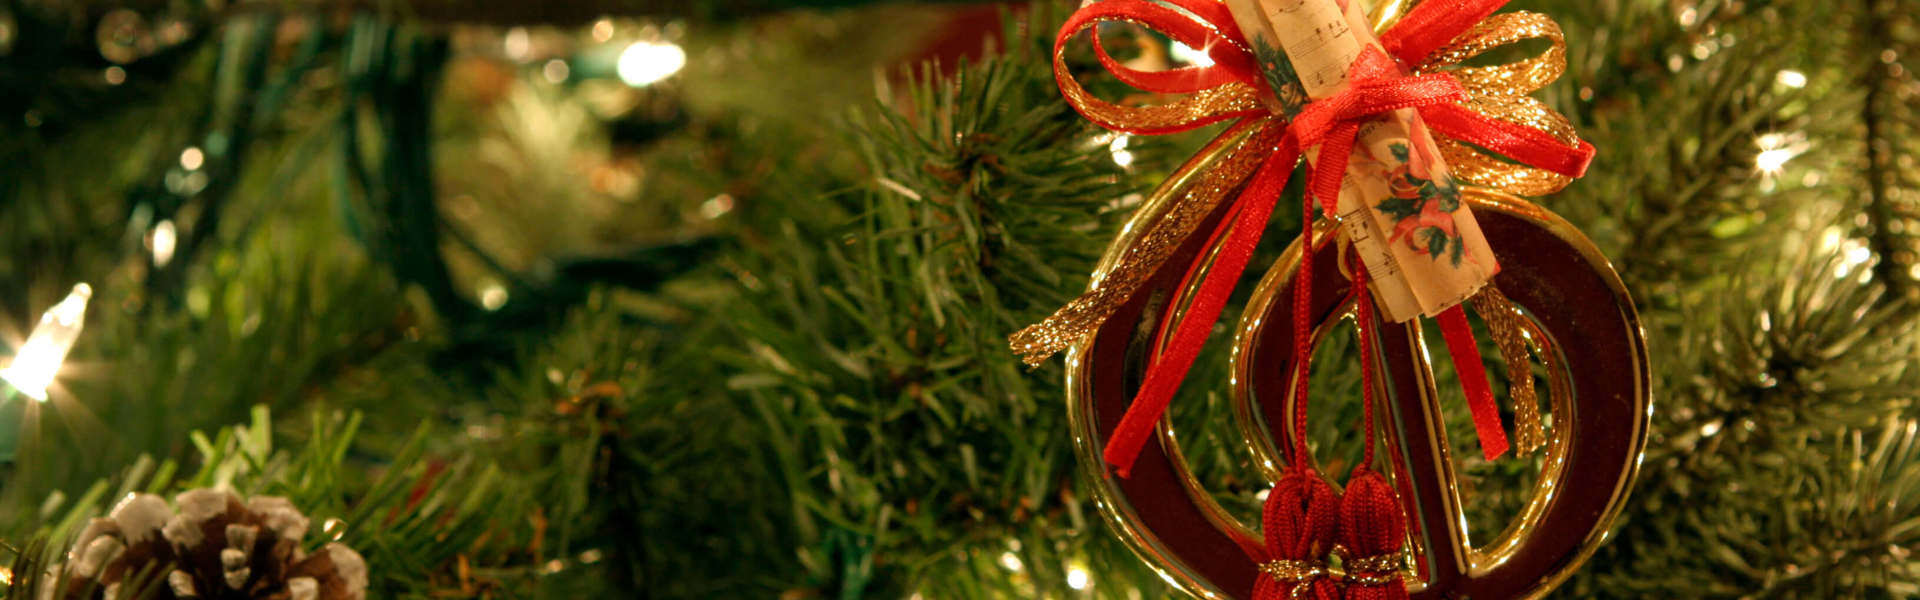 a close up of a Christmas ornament on a tree